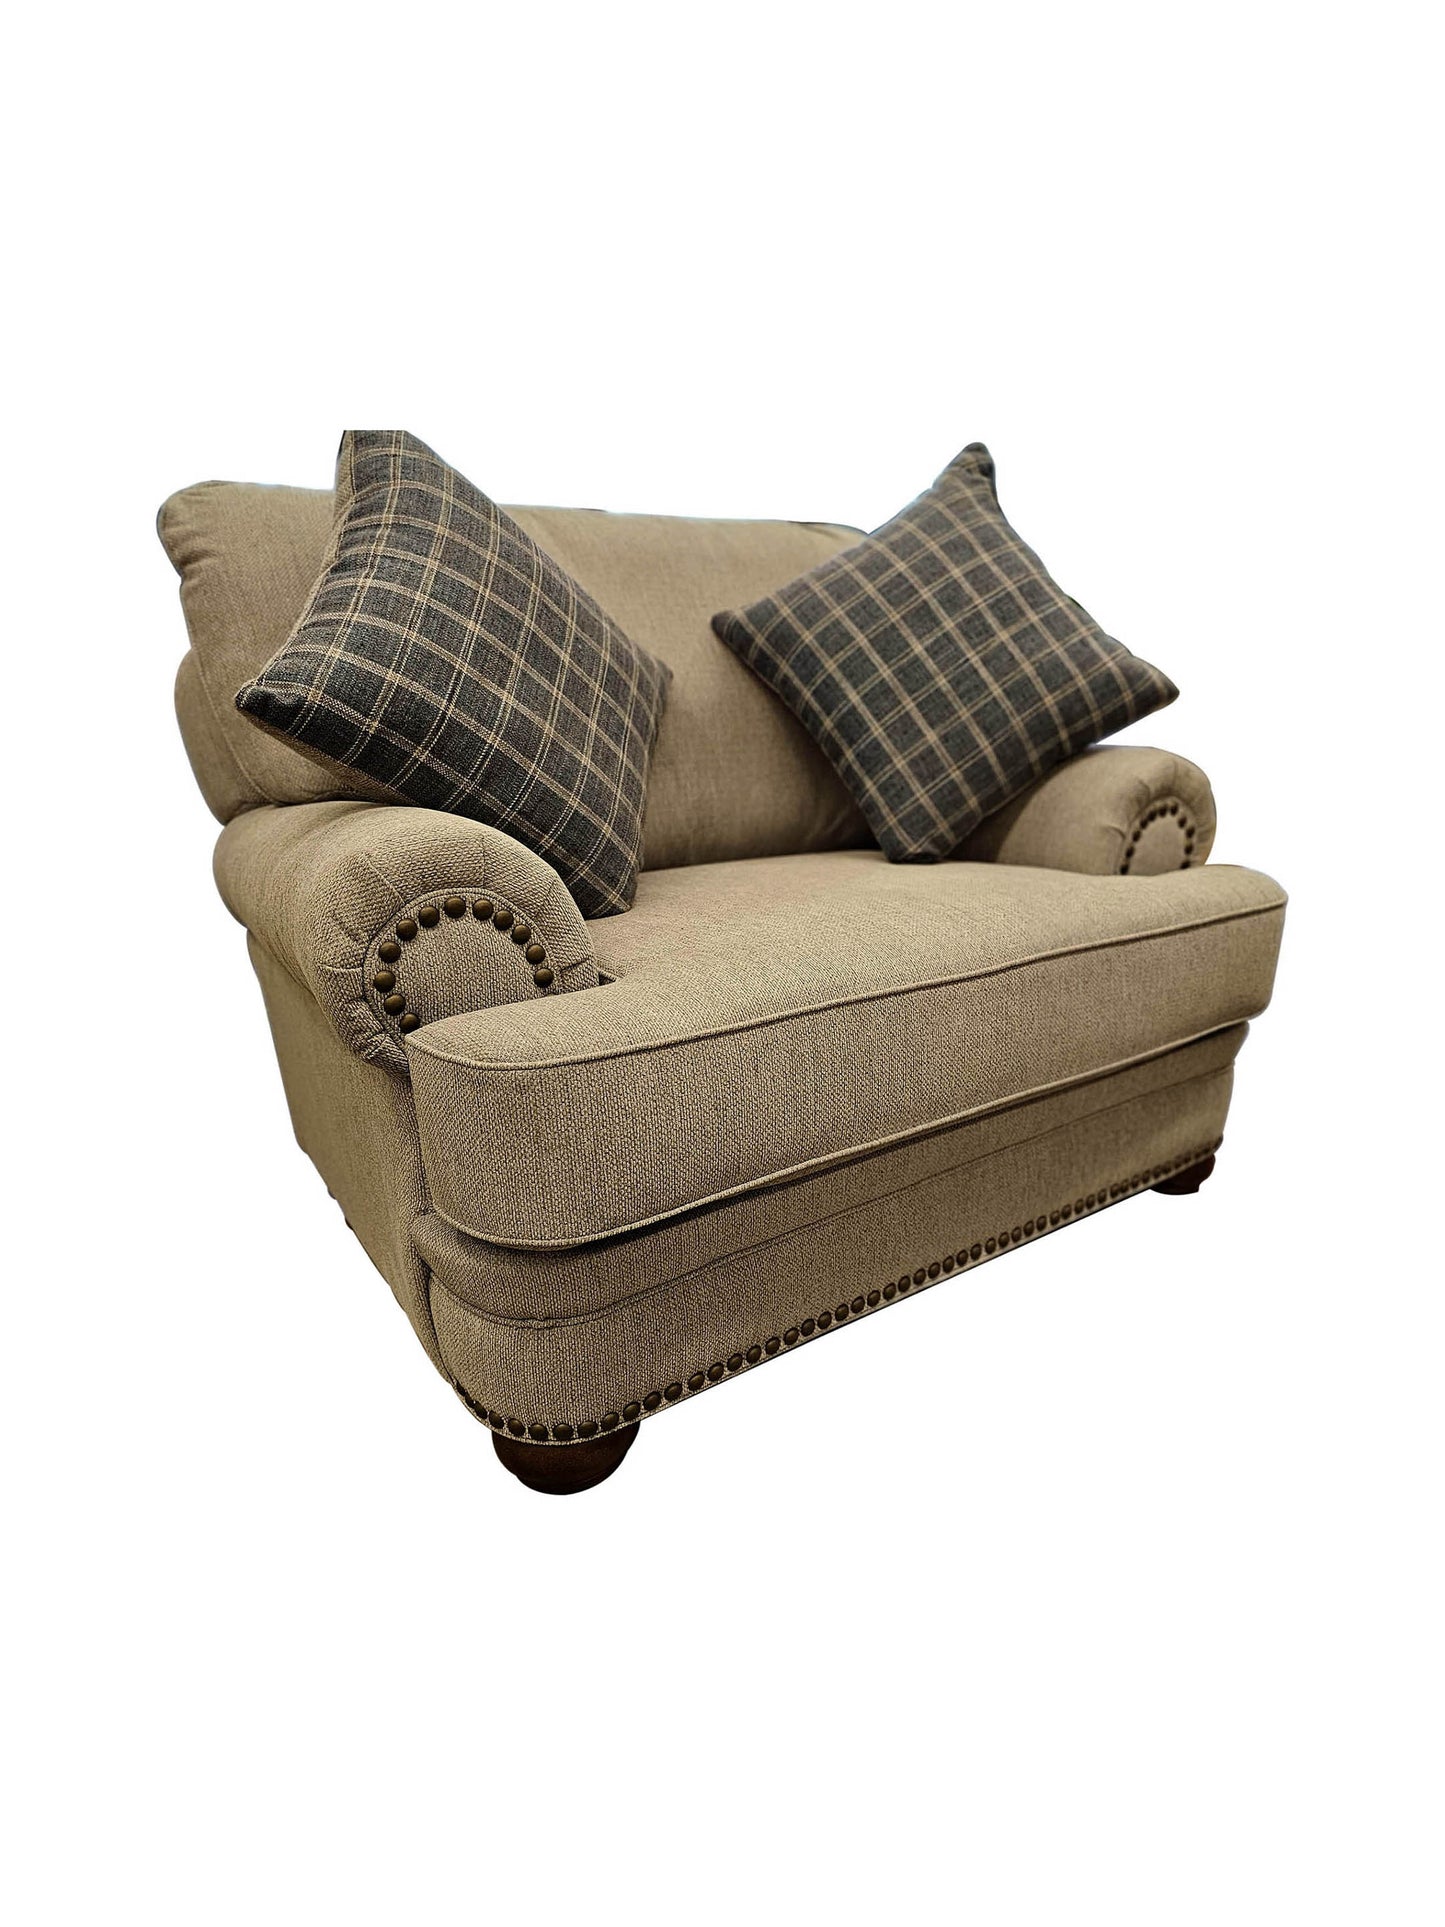 Eclectic Home Mackenzie Taupe Sofa Chair